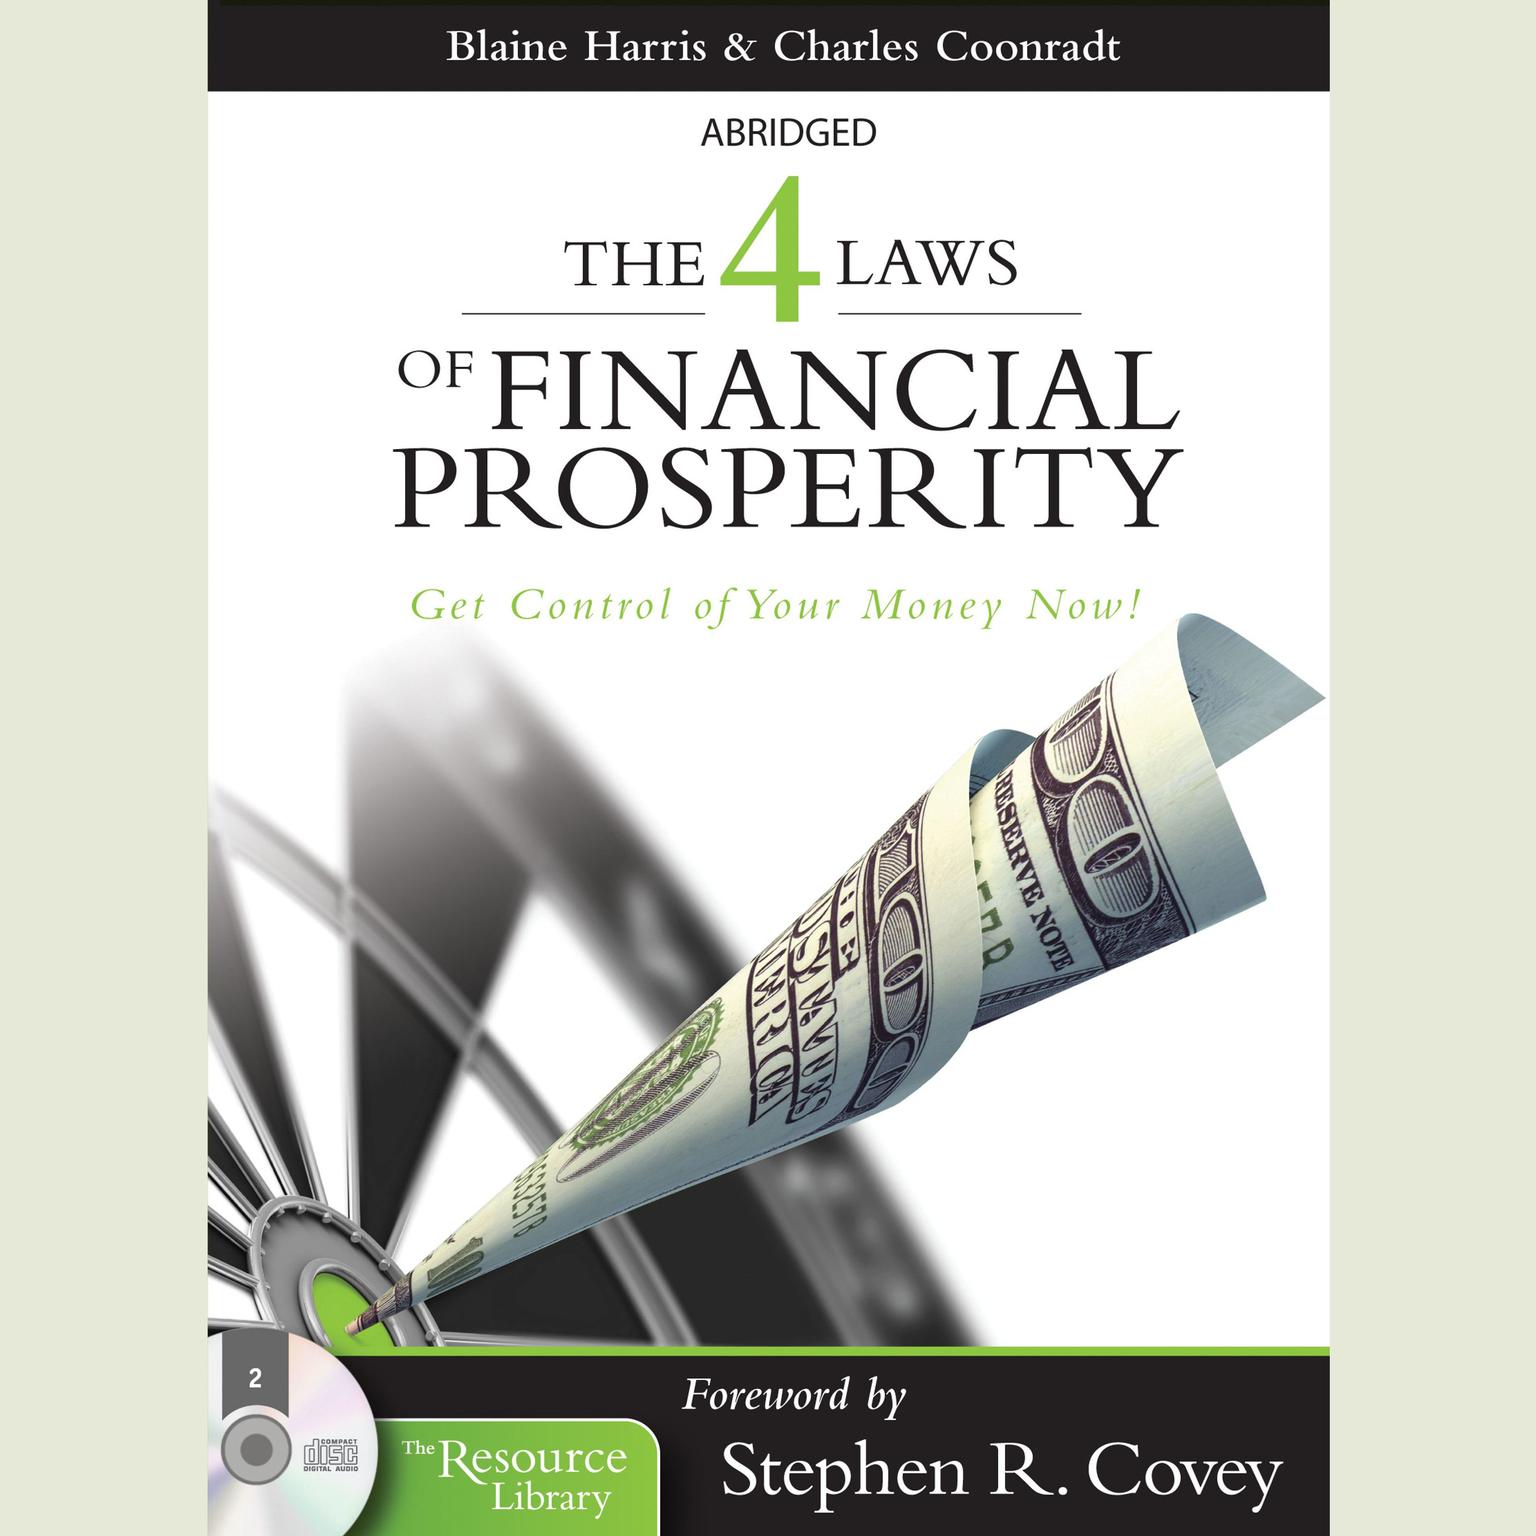 The 4 Laws of Financial Prosperity (Abridged): Get Conrtol of Your Money Now! Audiobook, by Blaine Harris